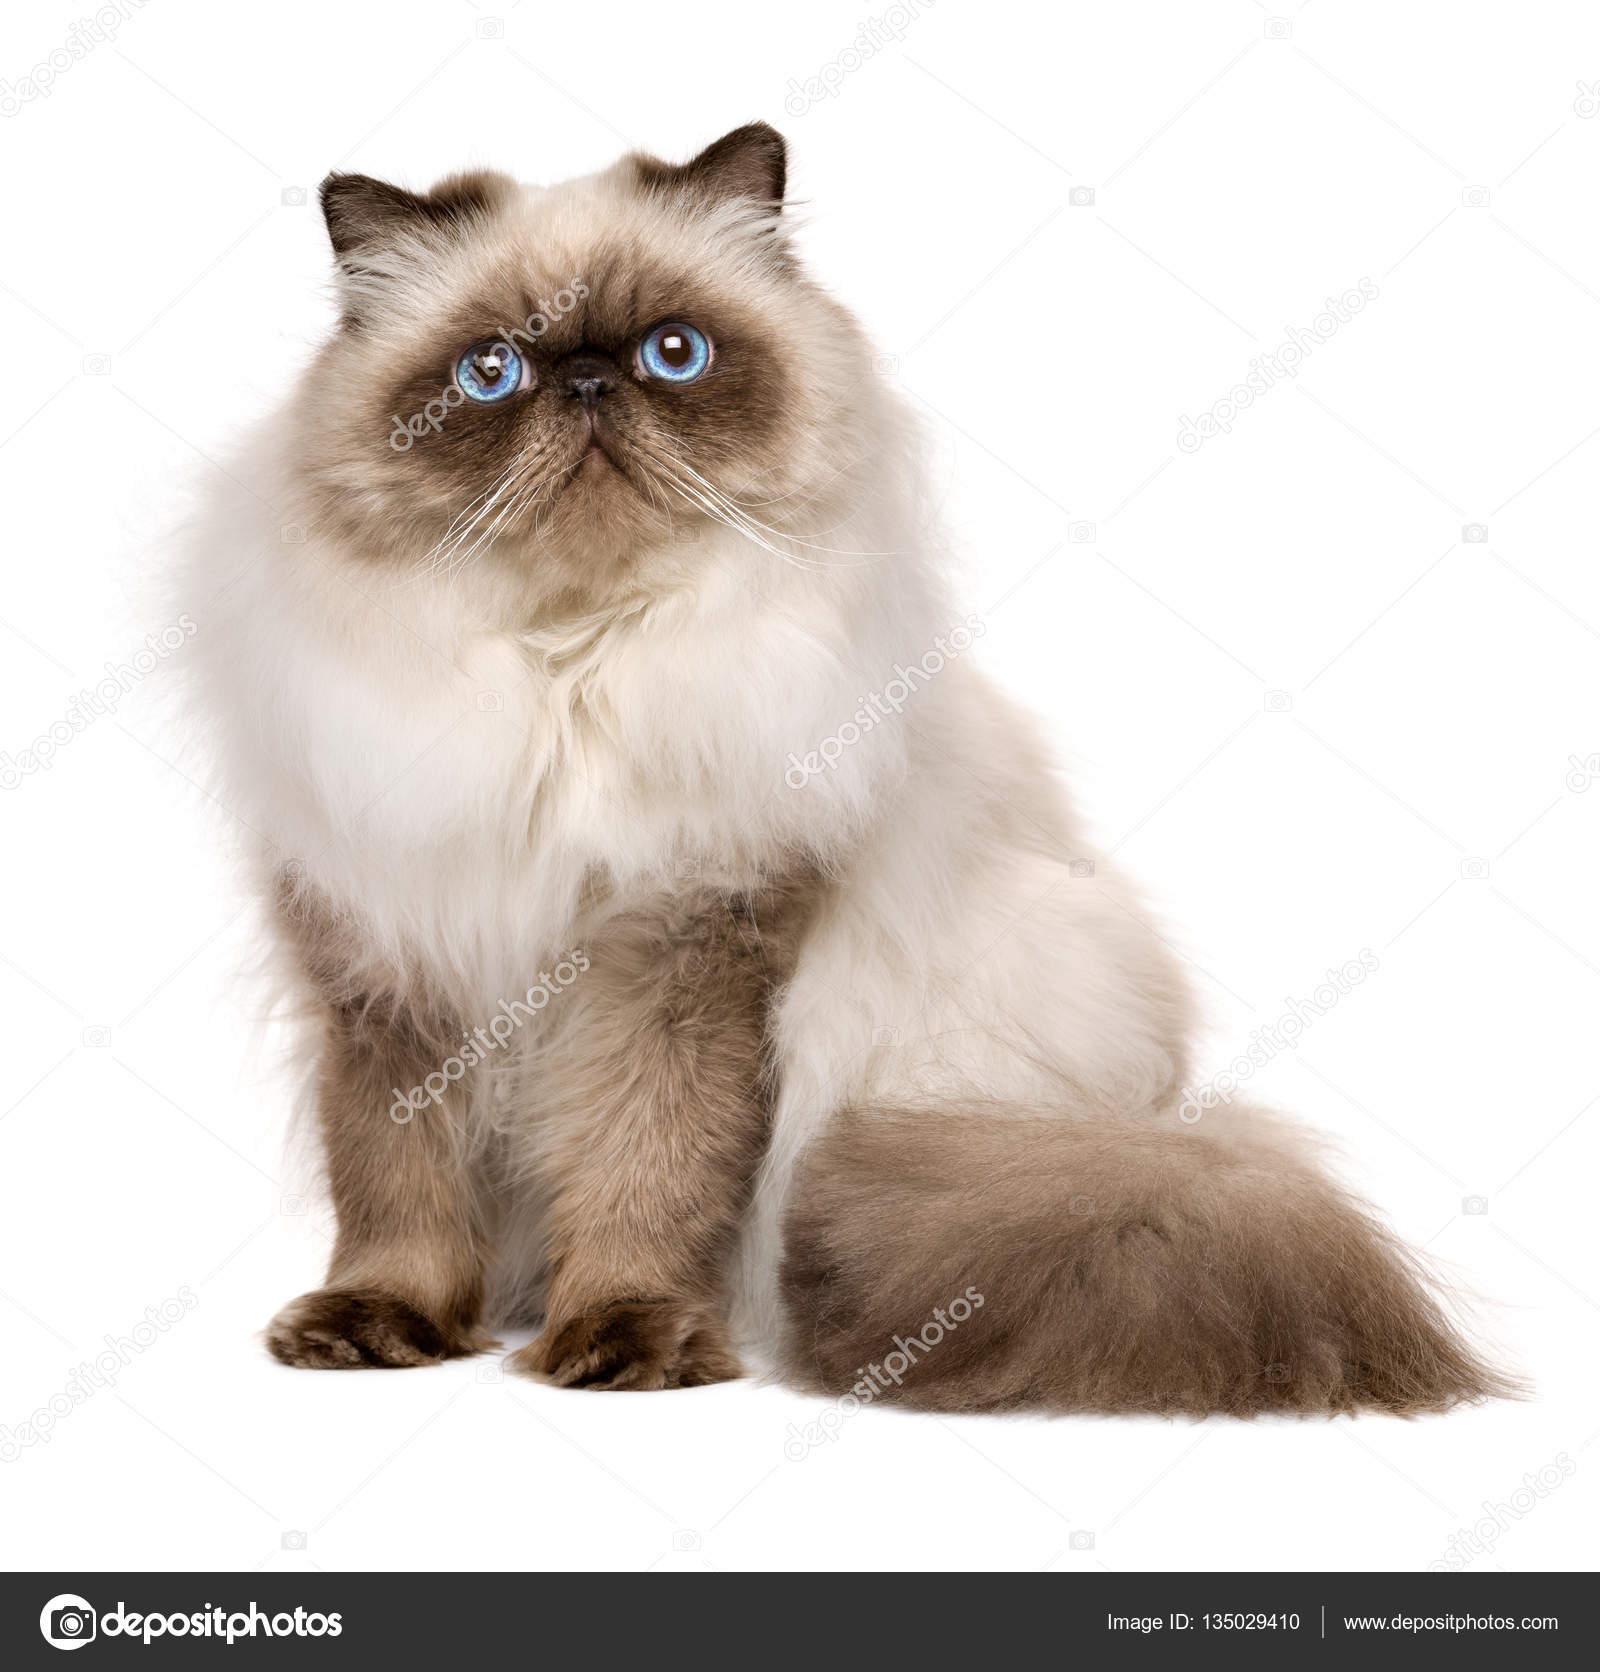 Cute 1 year old seal colourpoint persian cat — Stock Photo